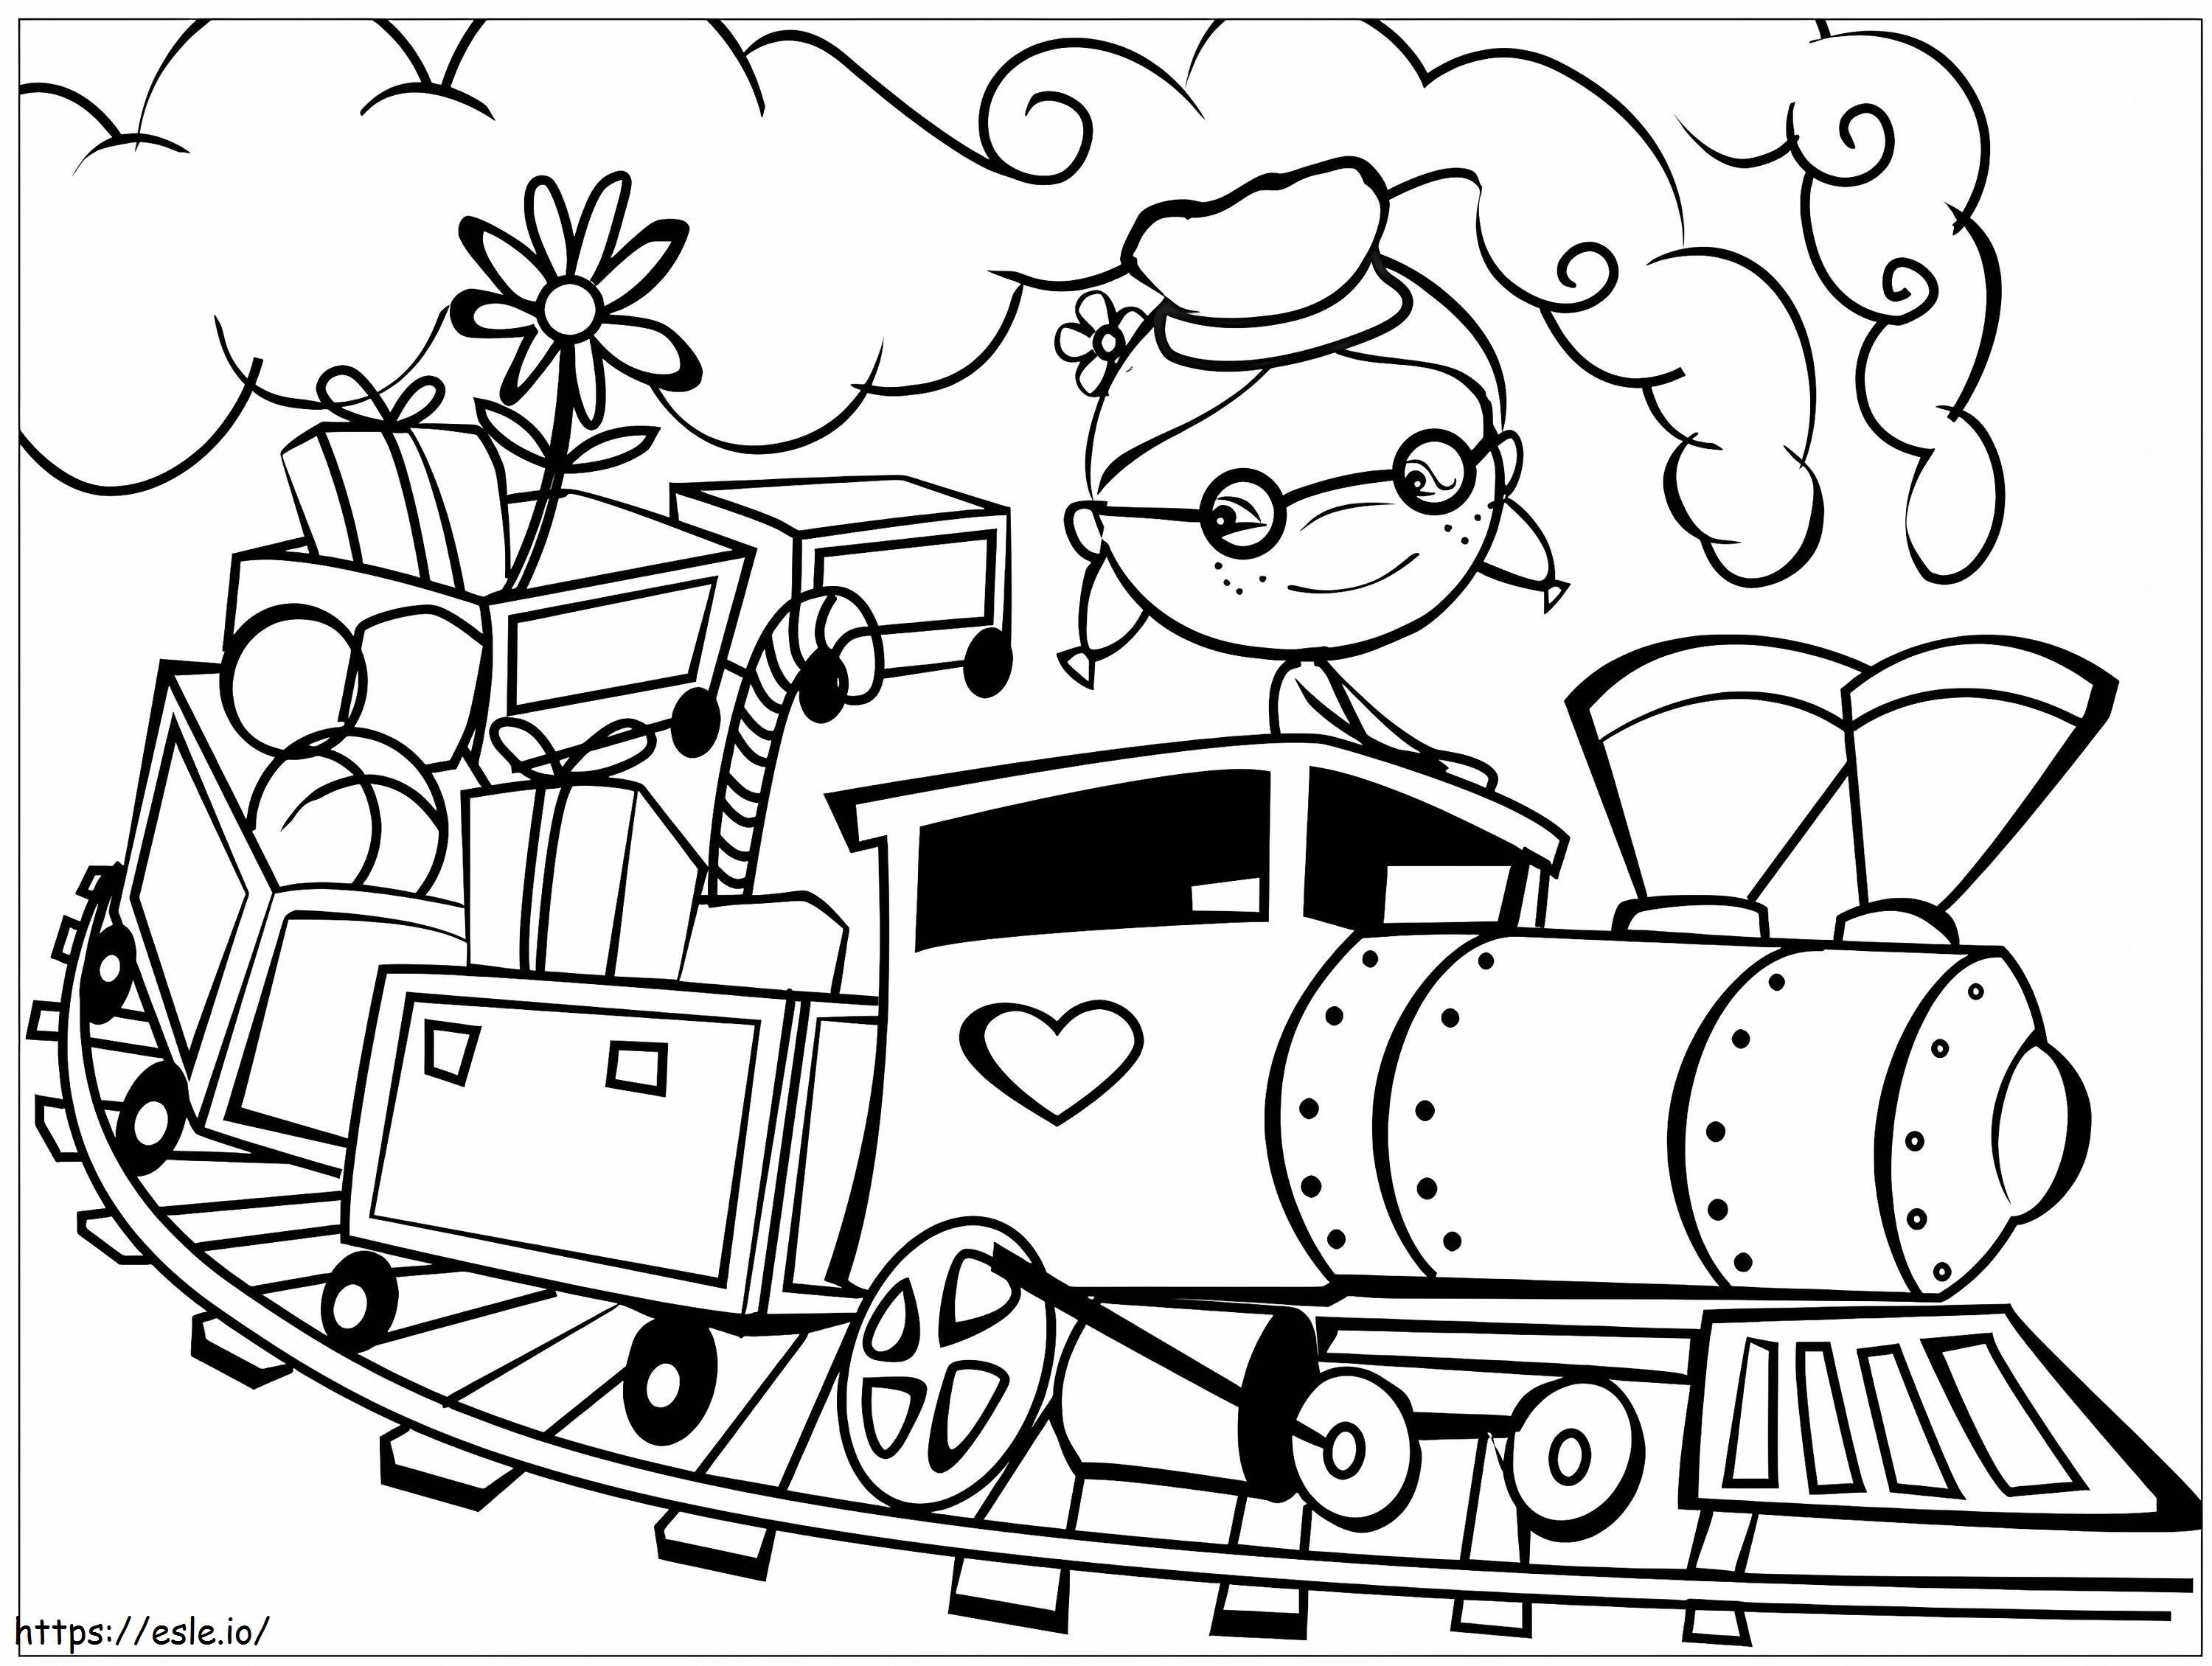 Train On A Curved Track coloring page